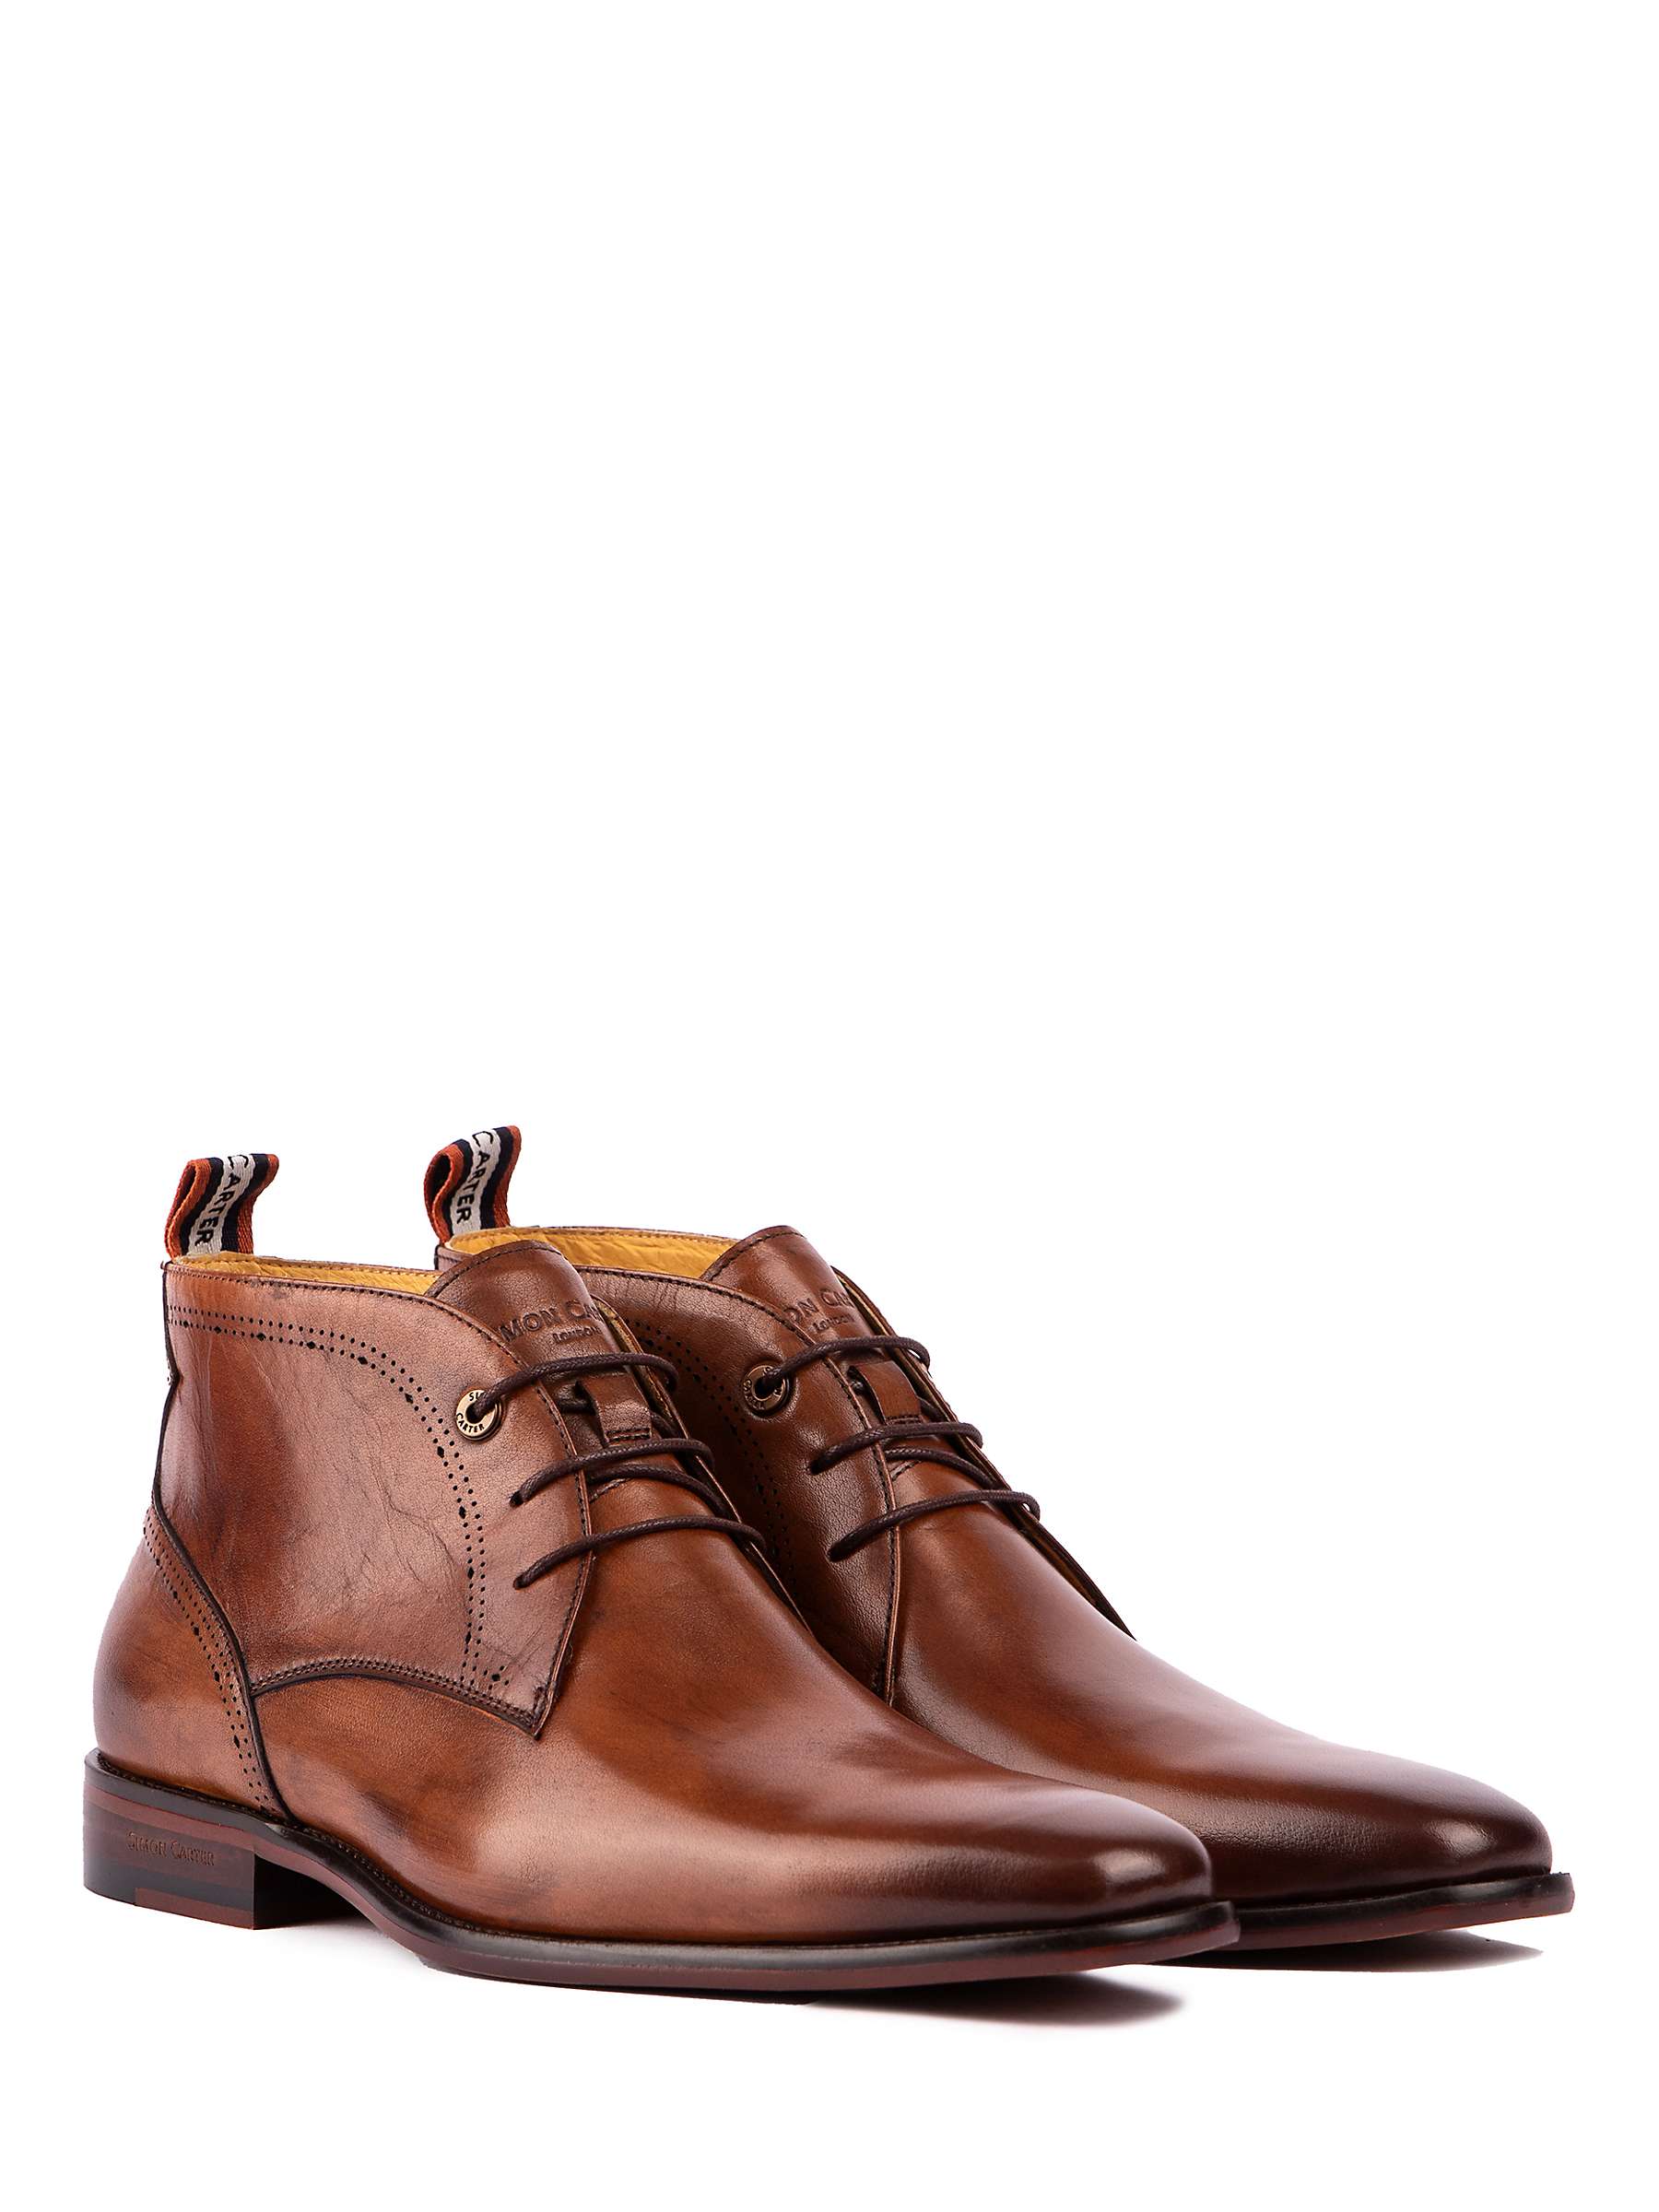 Buy Simon Carter Hop Leather Chukka Boots Online at johnlewis.com